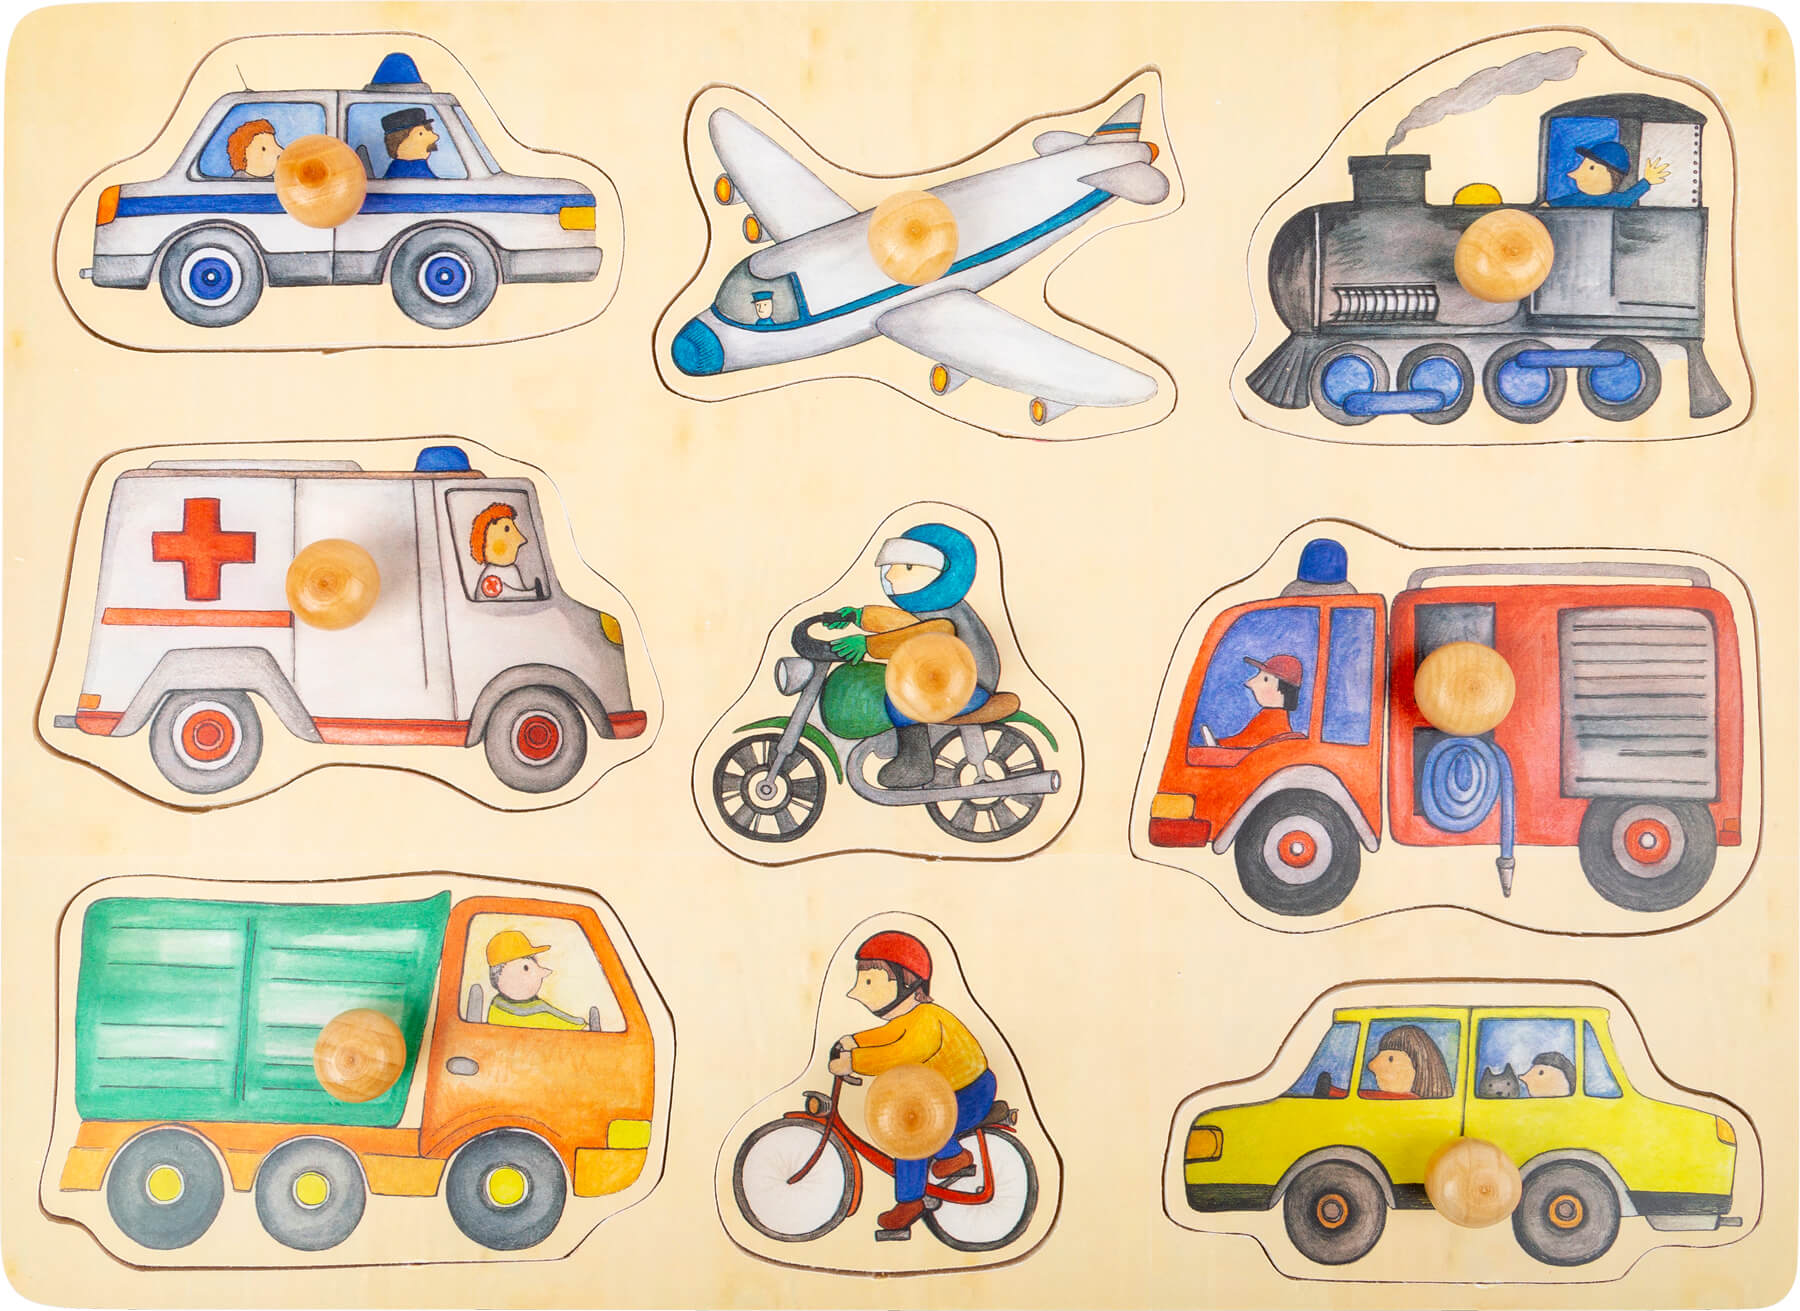 small foot - City Vehicles Puzzle